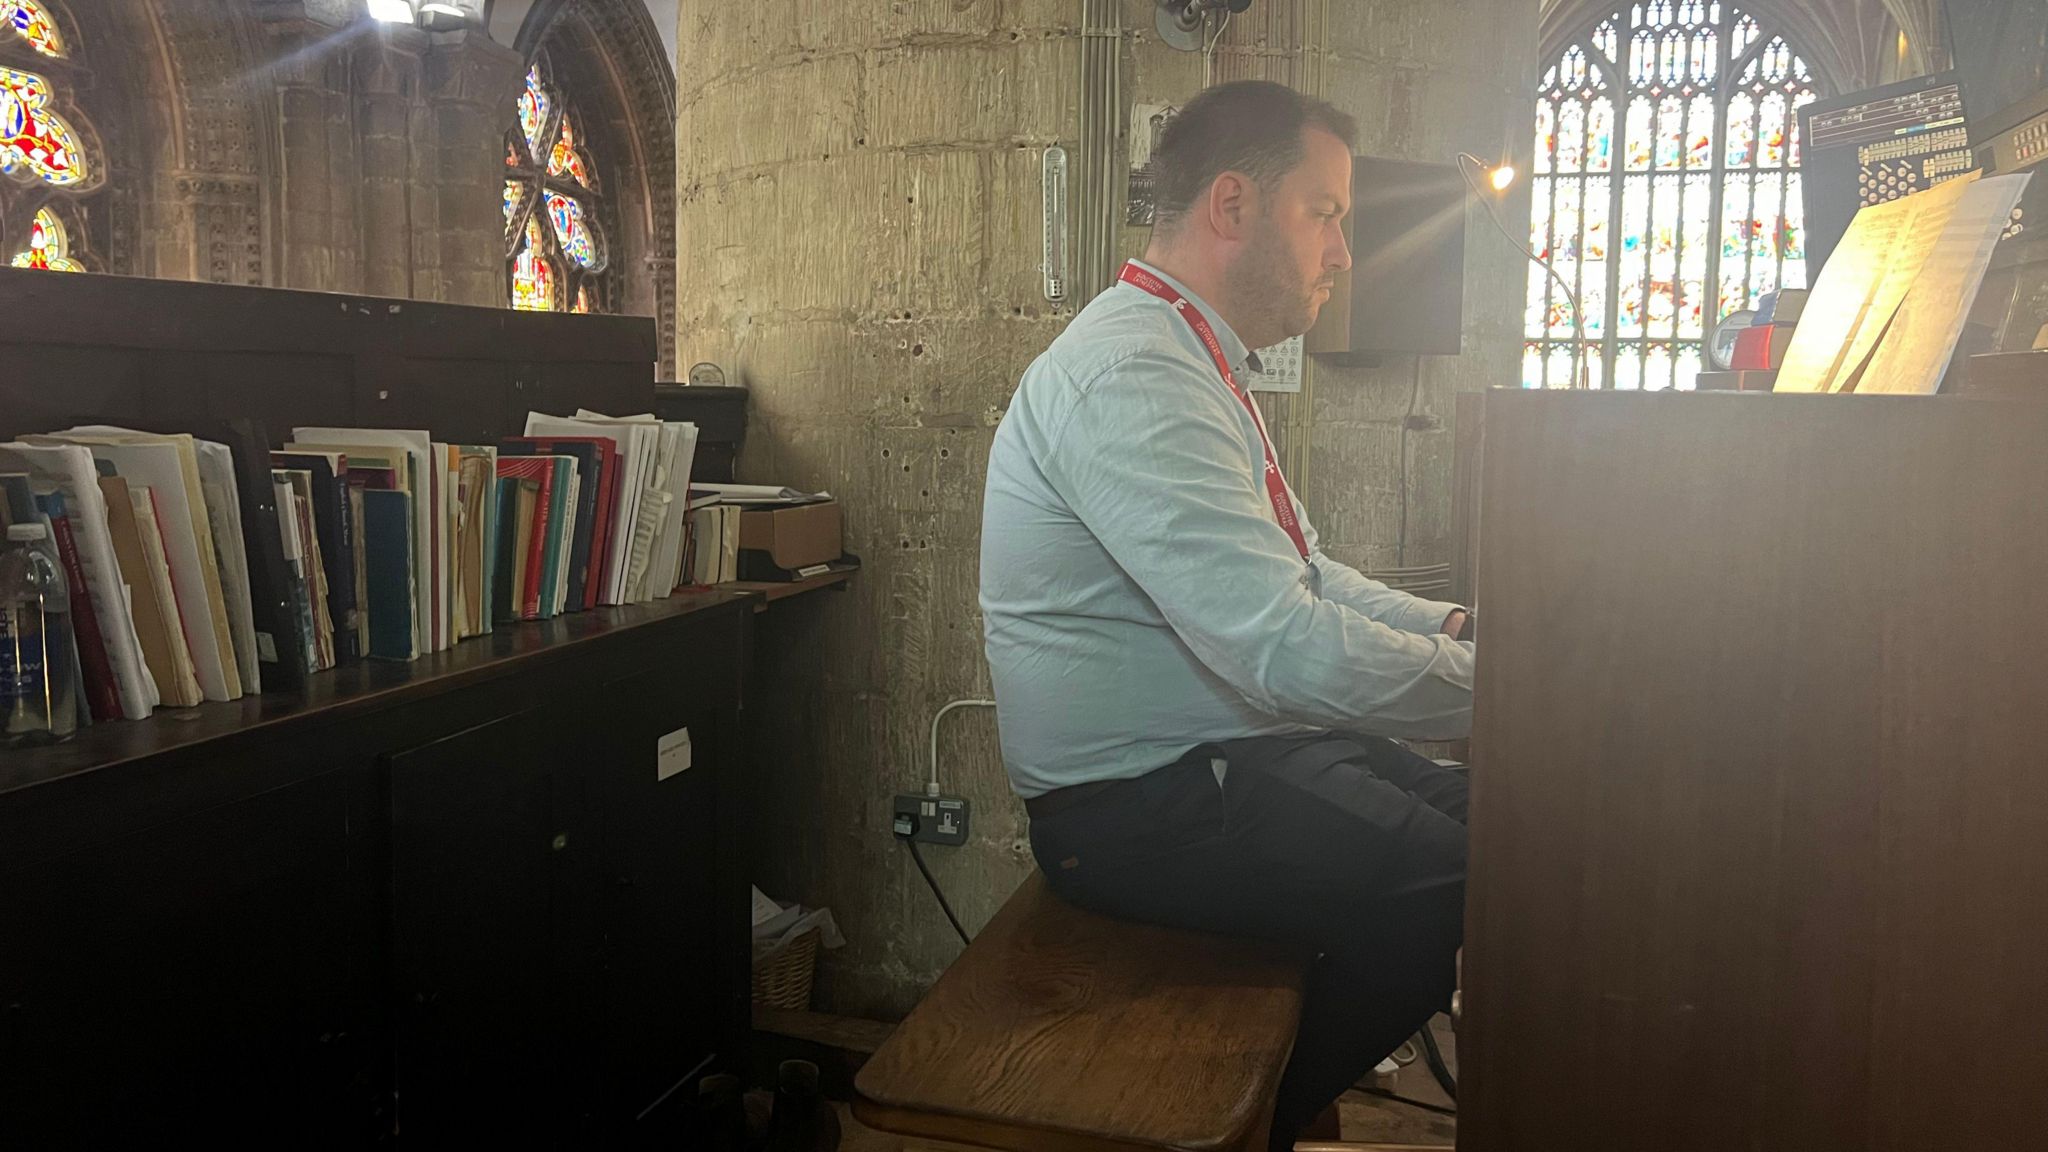 Jonathan Hope playing a digital organ at Gloucester Cathedral. He is sat next to a bookshelf.